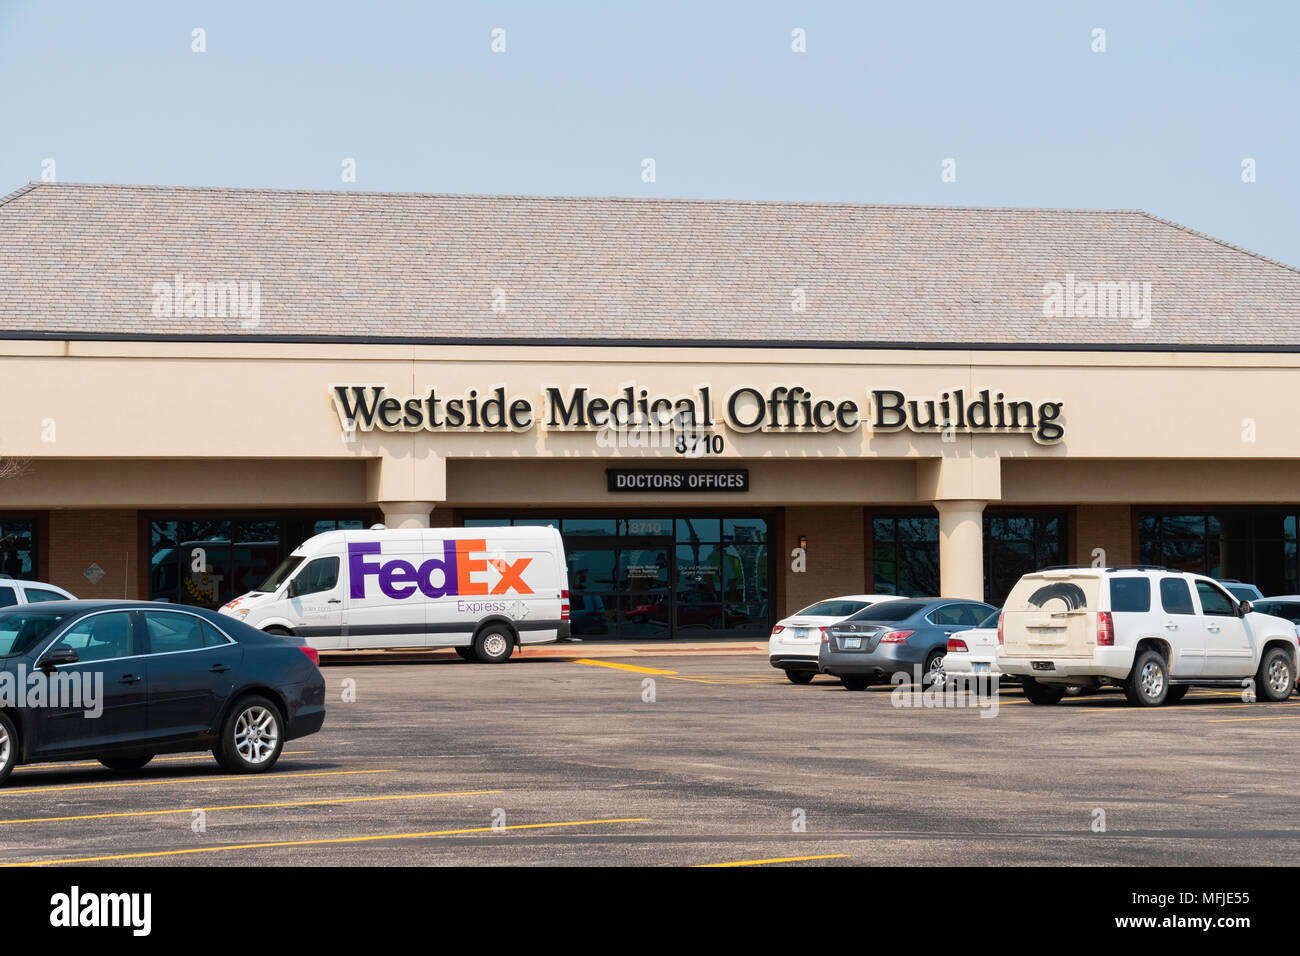 Westside Medical Office Building a medical business in a 